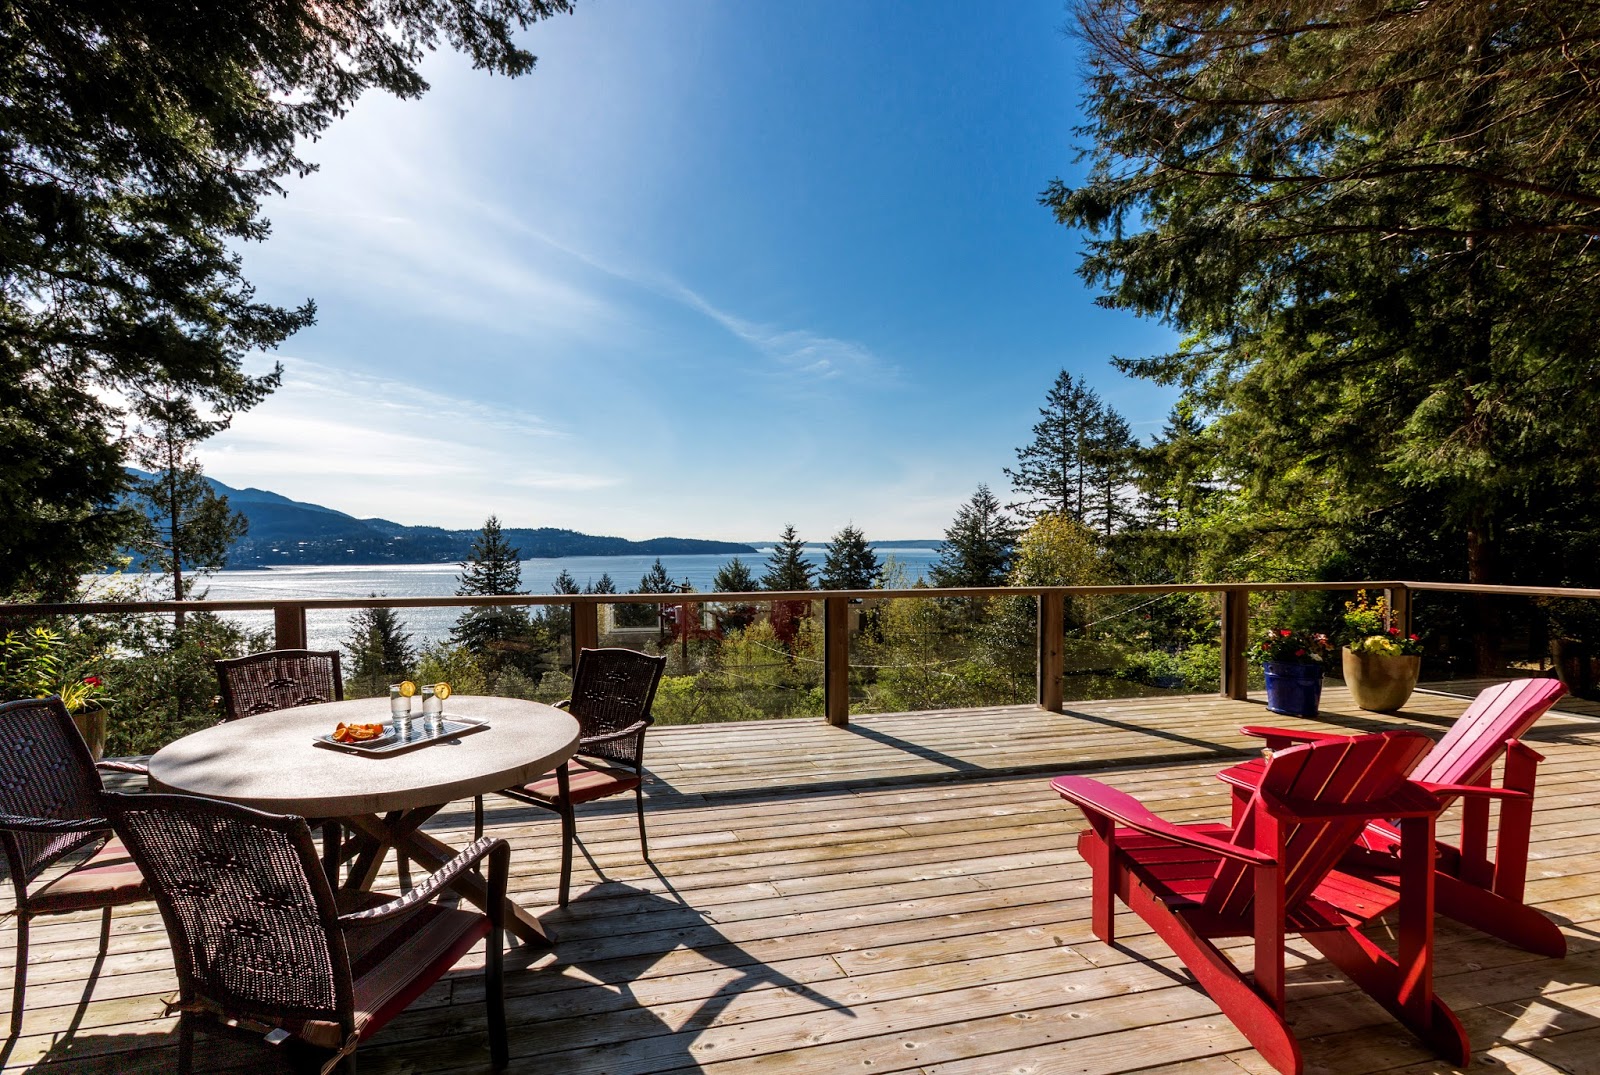 Accommodations On Bowen Island A Multigenerational Dream For The